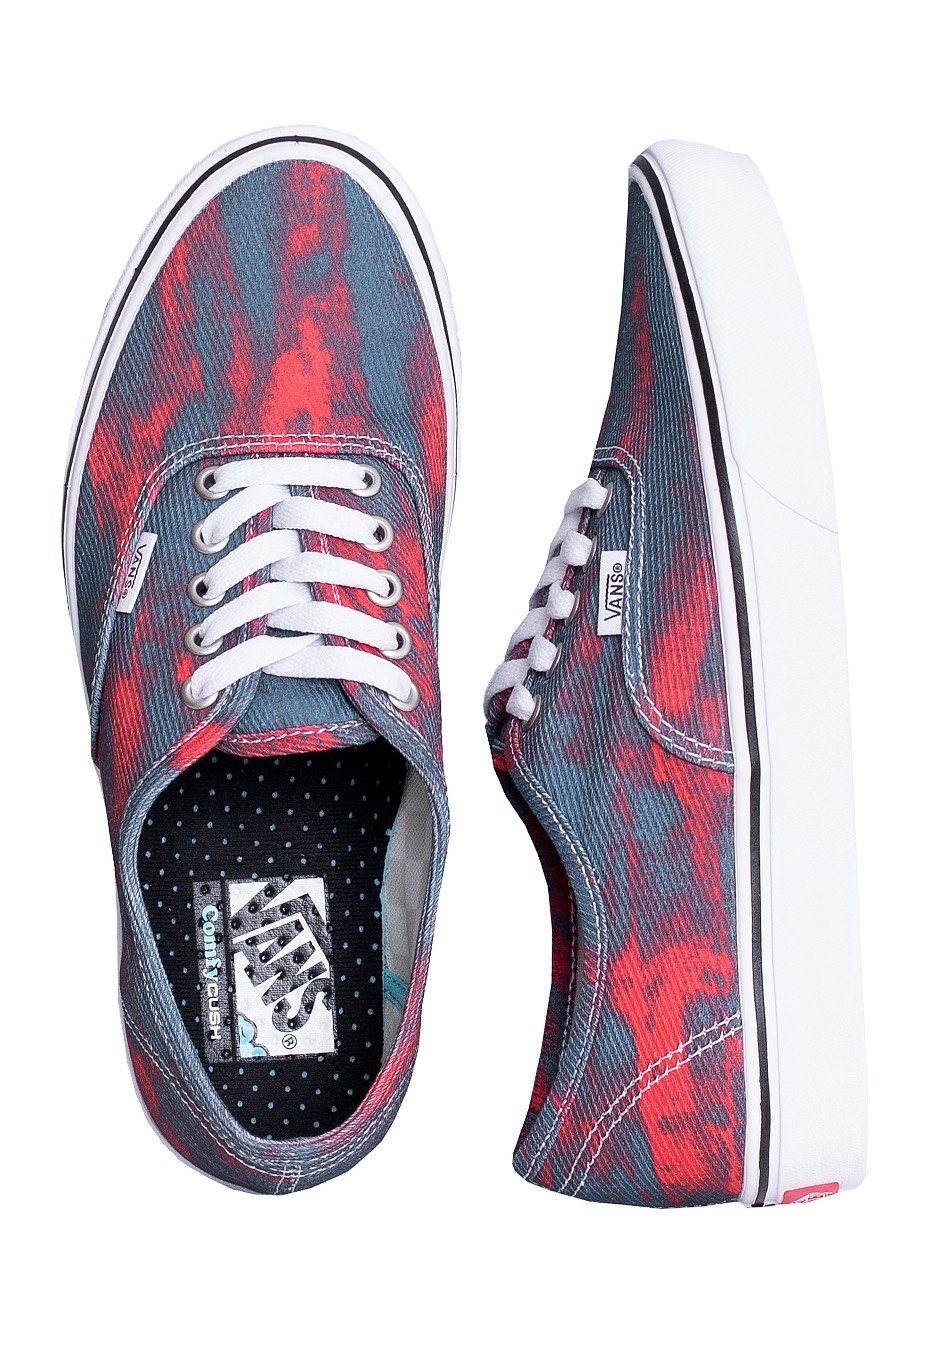 Vans - Comfycush Authentic (In Bloom) Blue/Red - Skateschuhe